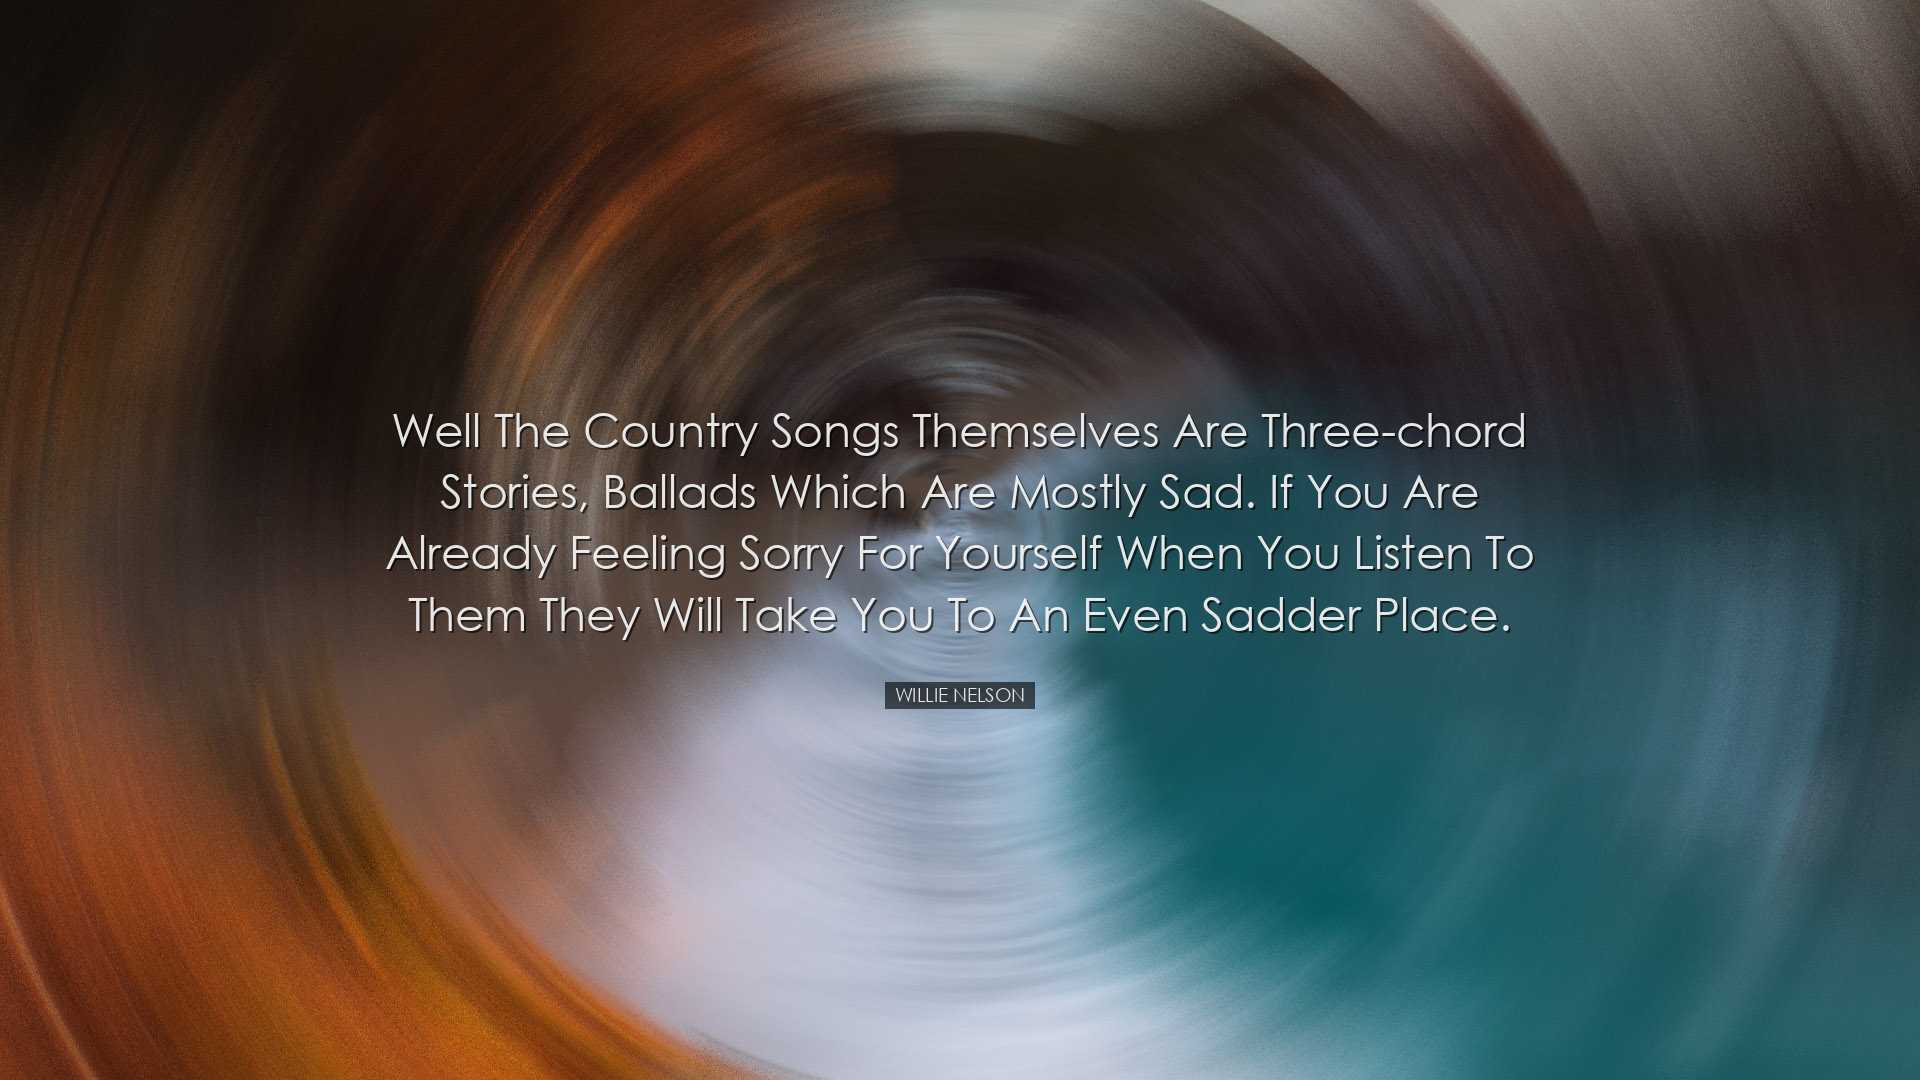 Well the country songs themselves are three-chord stories, ballads